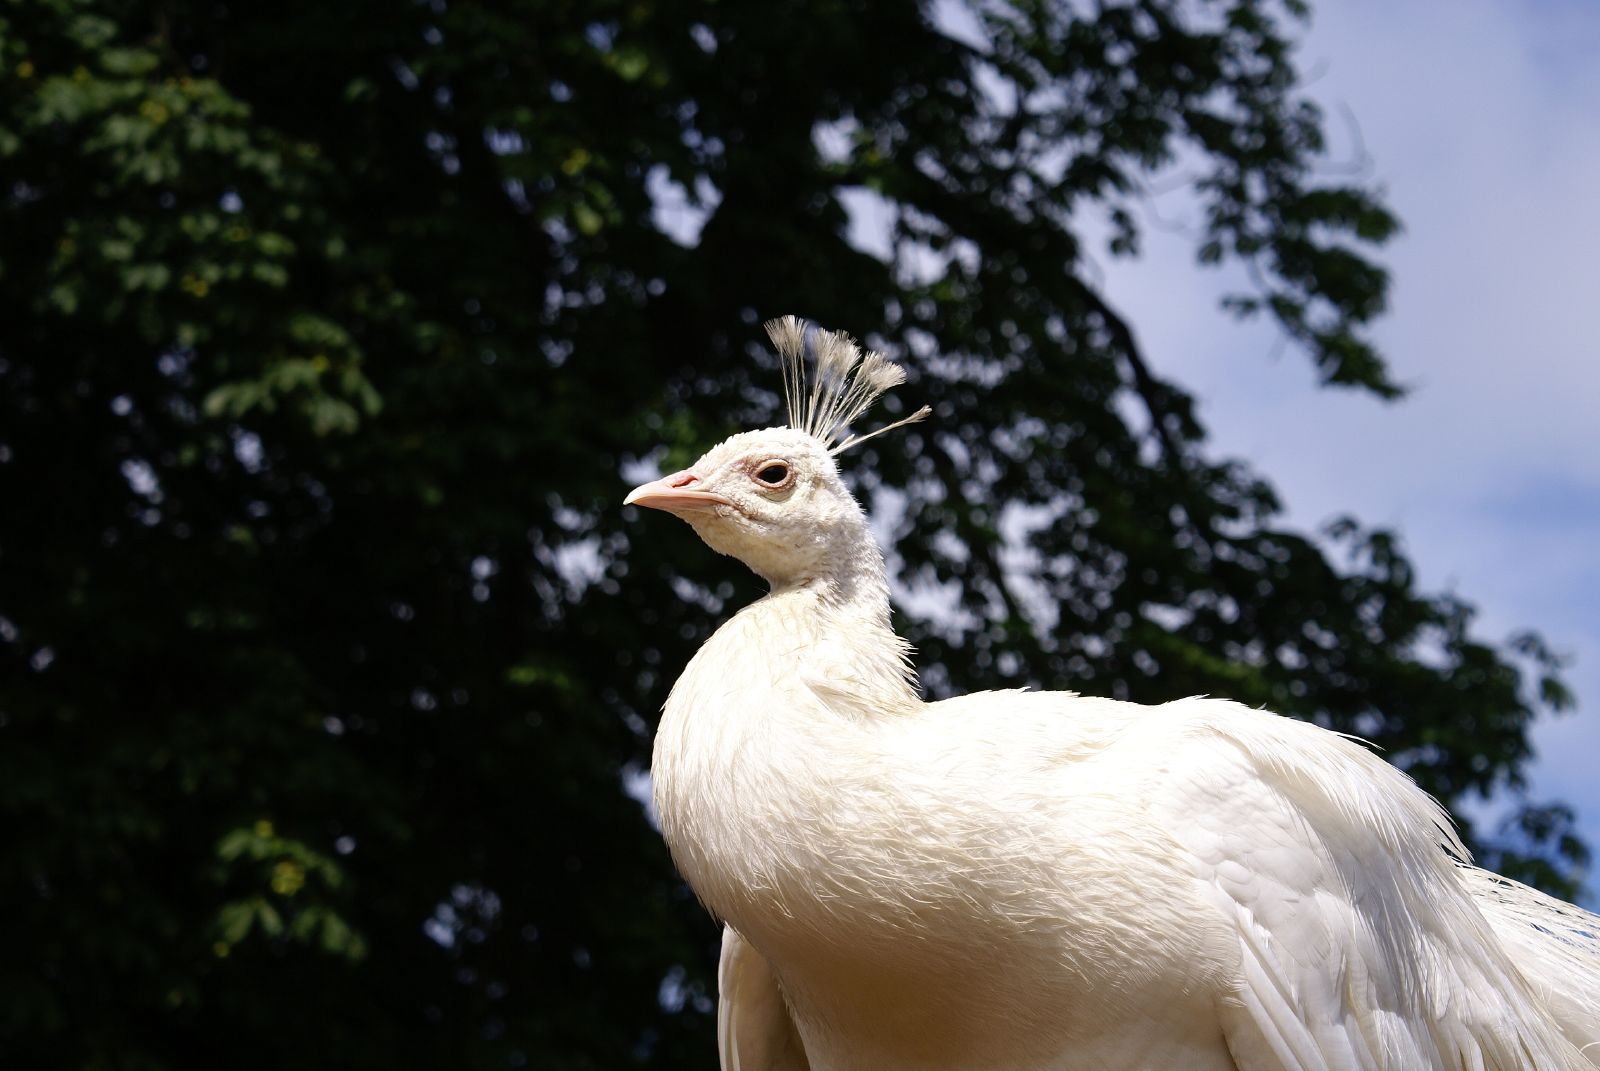 a white peacock with a black tail standing next to trees